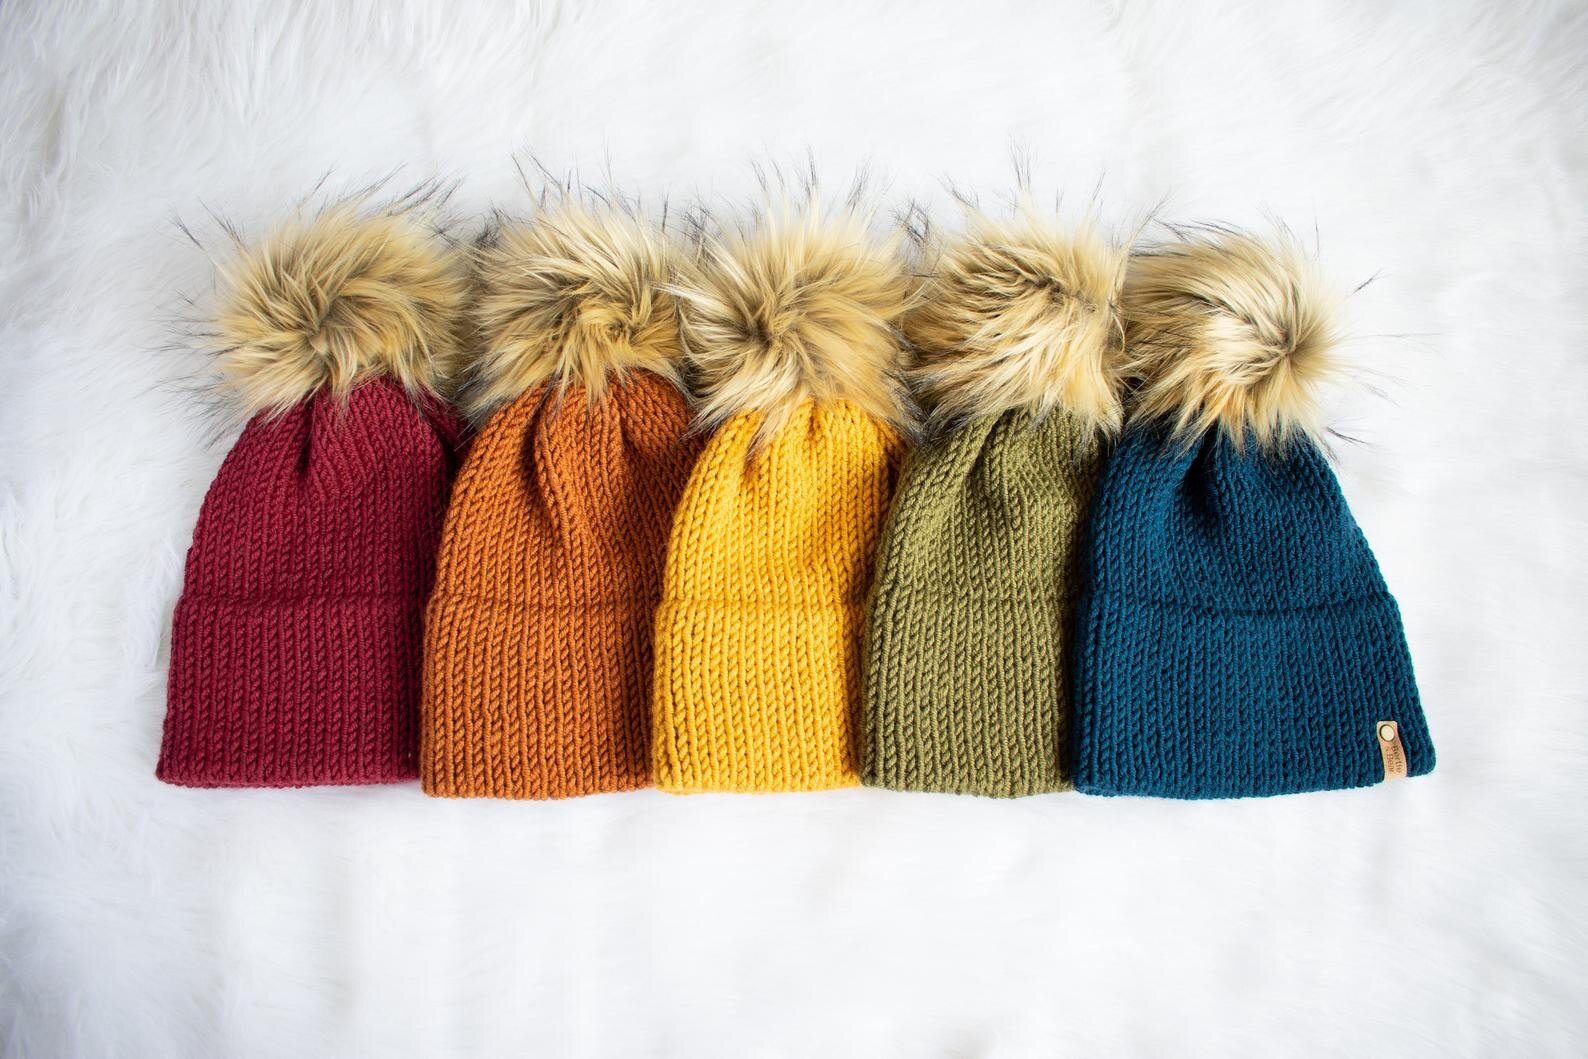 Bertie and Bear Knits creates the cutest handmade hats with faux fur poms.